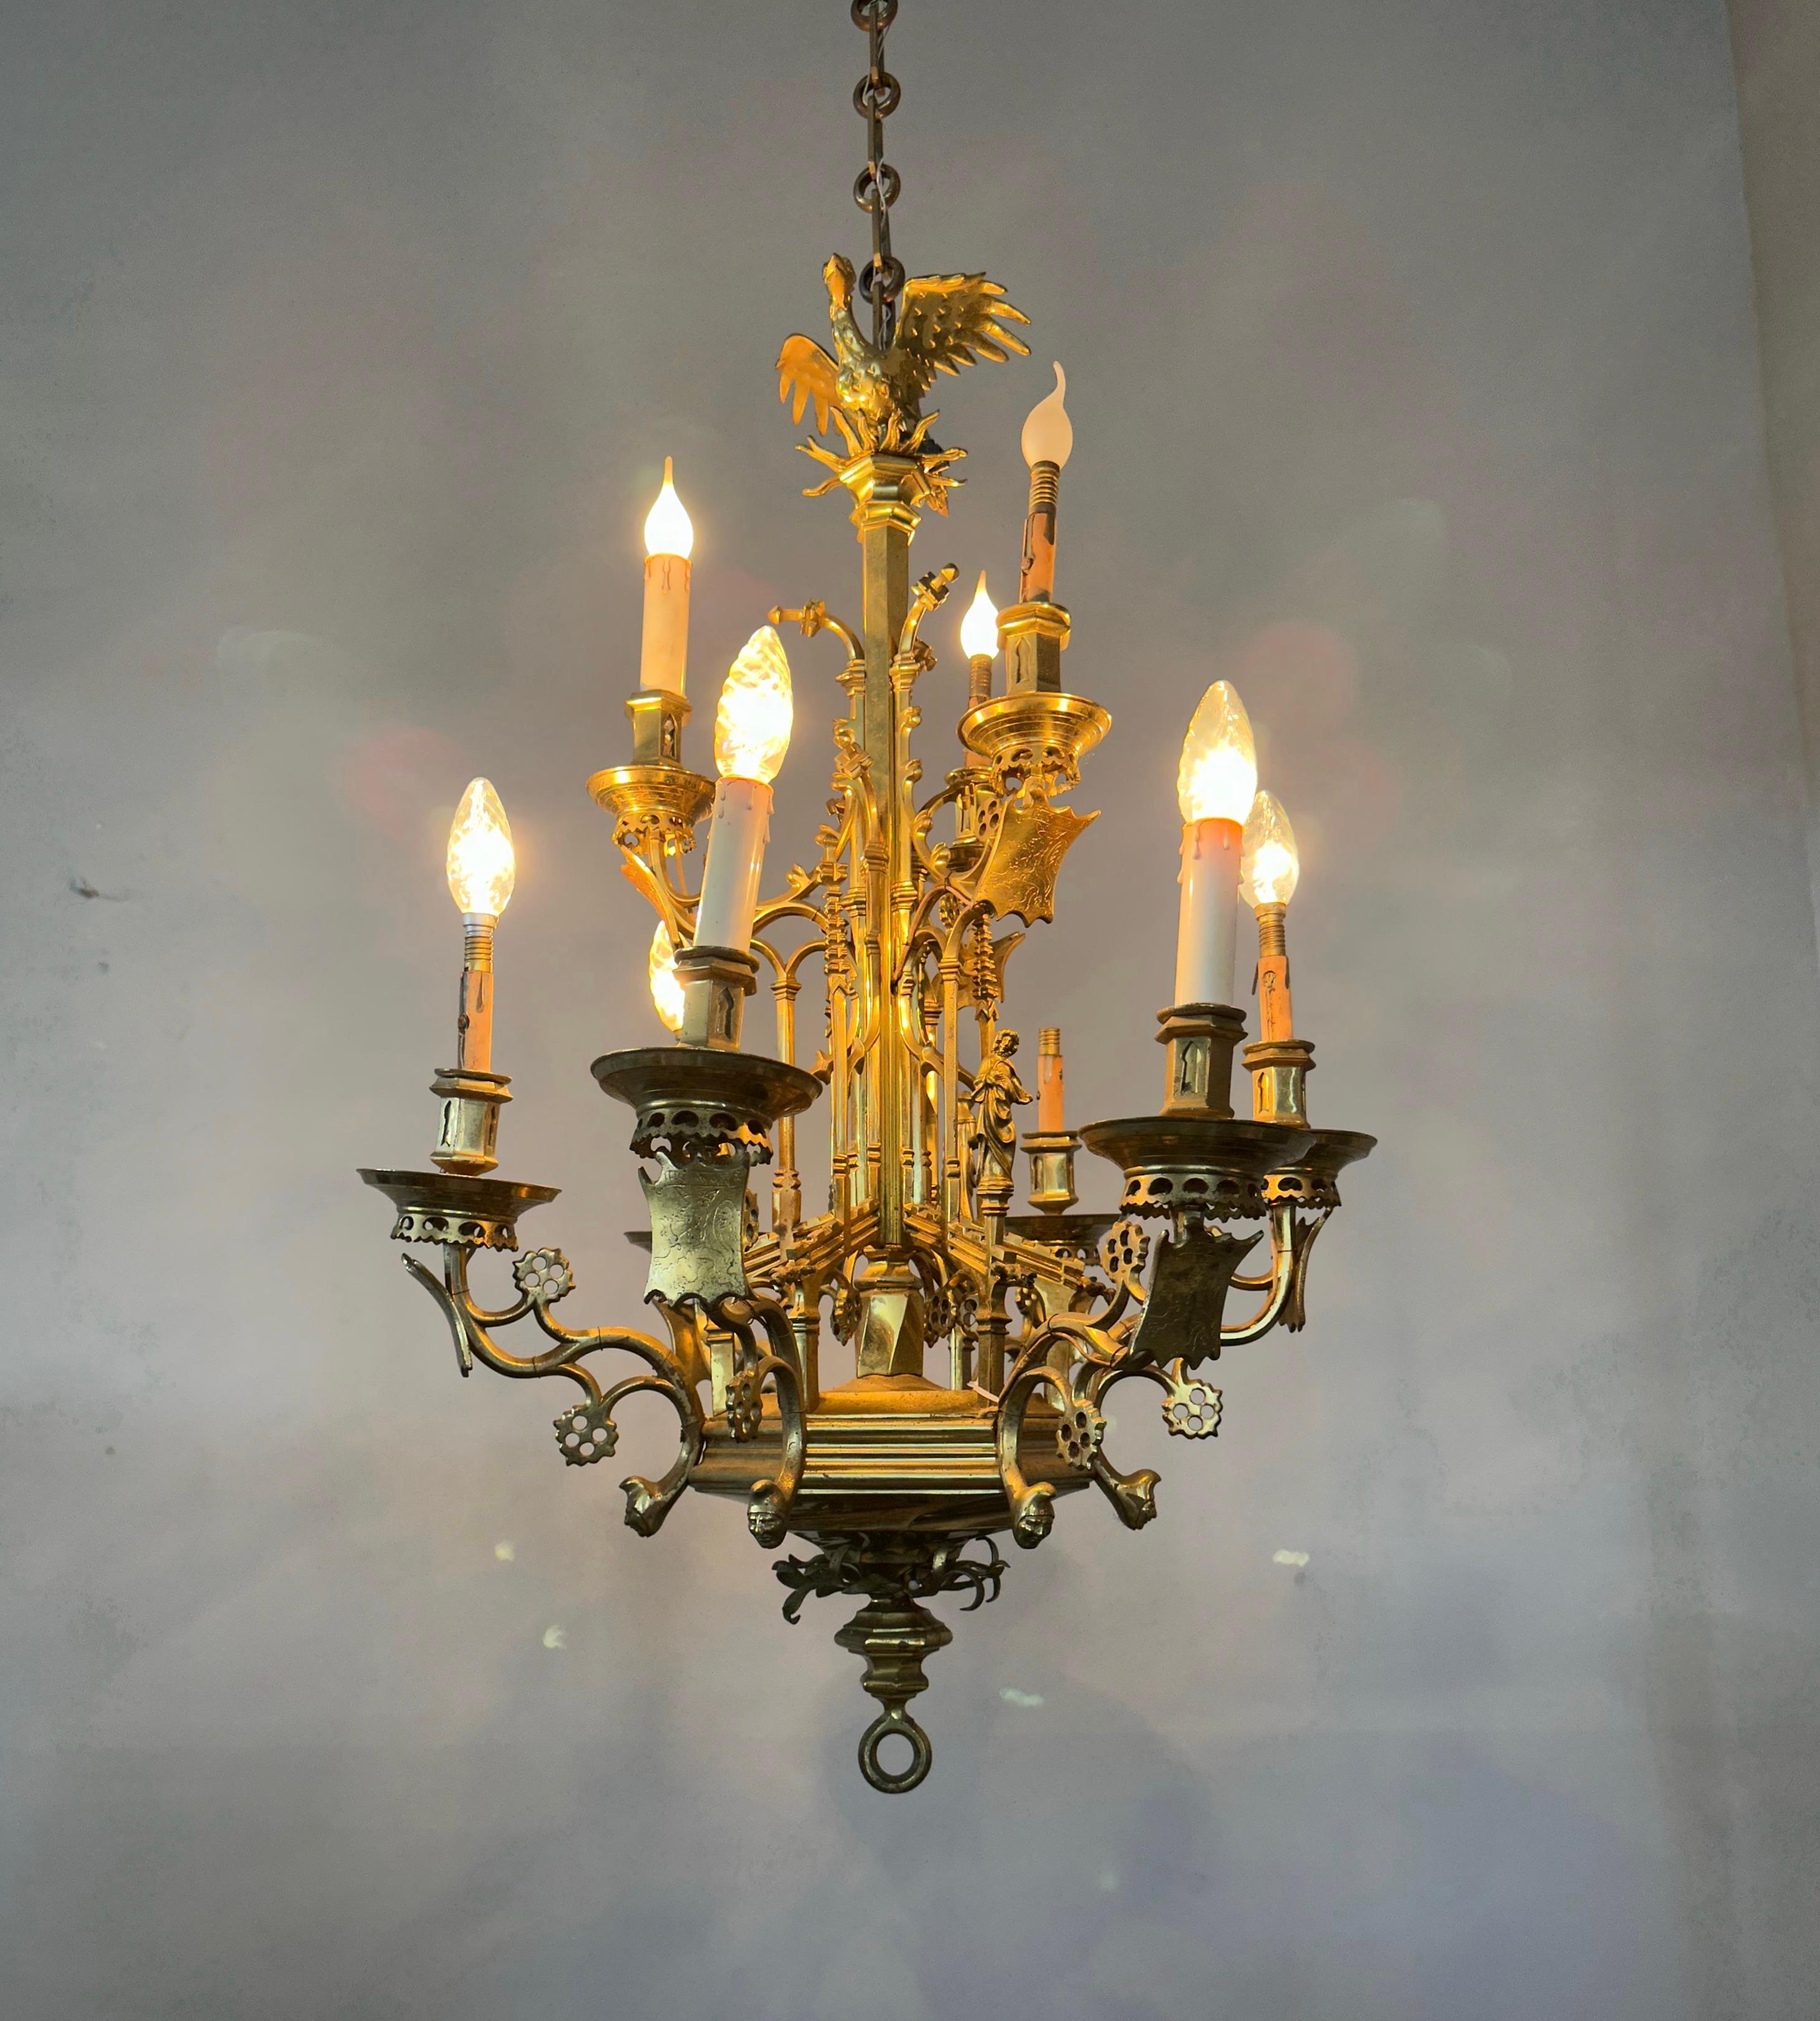 Awesome Antique Bronze Gothic Revival 9 Light Chandelier with Phoenix Sculpture For Sale 1